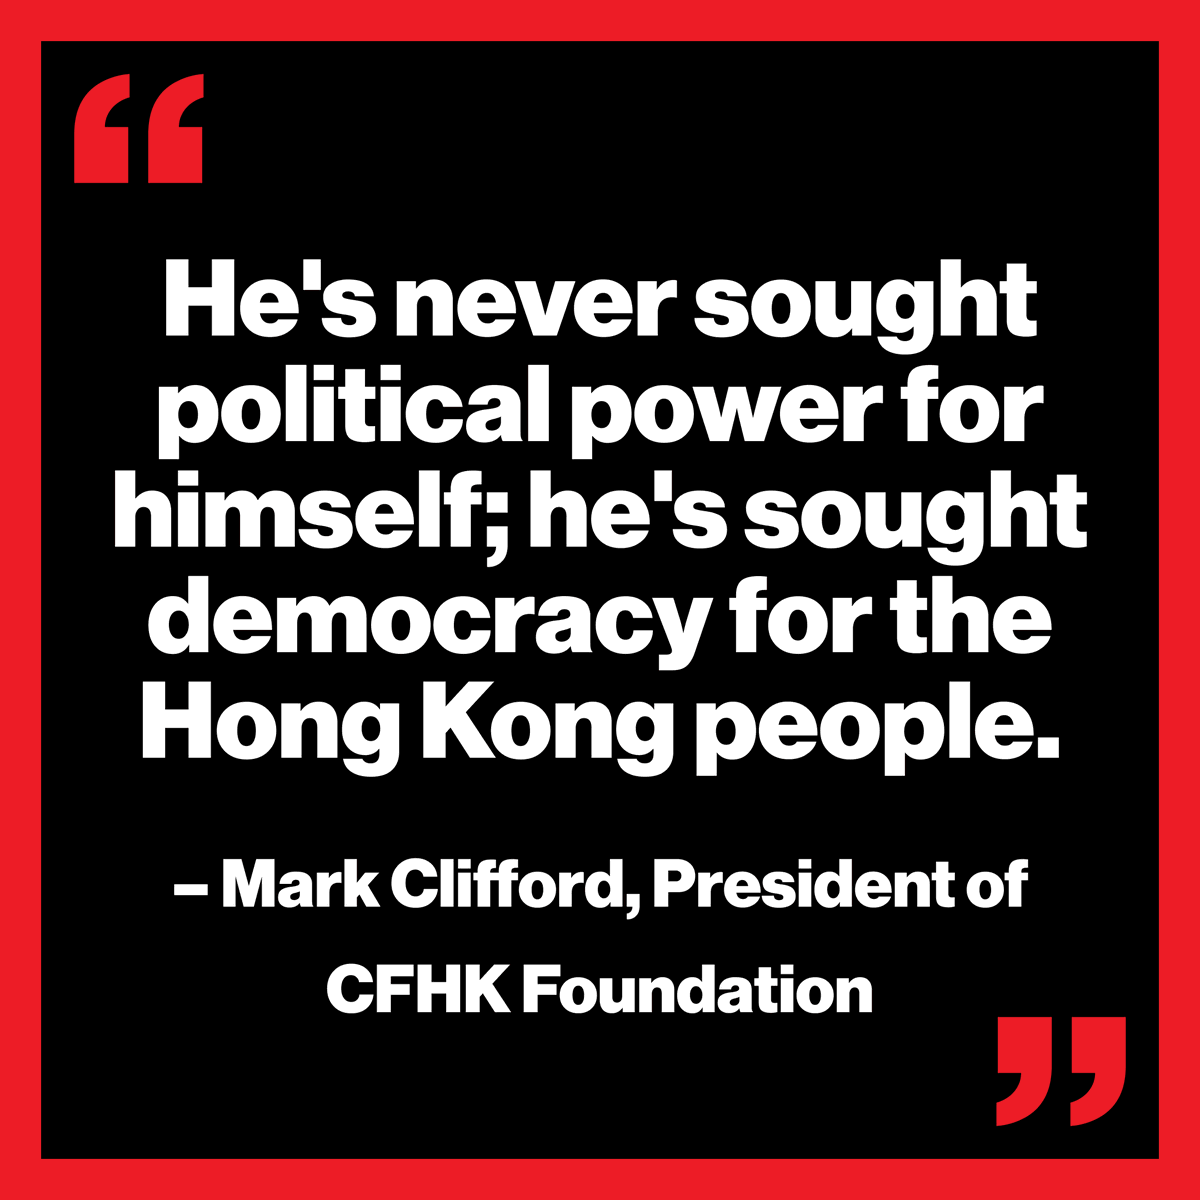 Discover the unwavering commitment of #JimmyLai to democracy and freedom in Hong Kong. Visit our press page now to learn more: supportjimmylai.com/press/ #FreeJimmyLai #JimmyLaiTrialUpdates